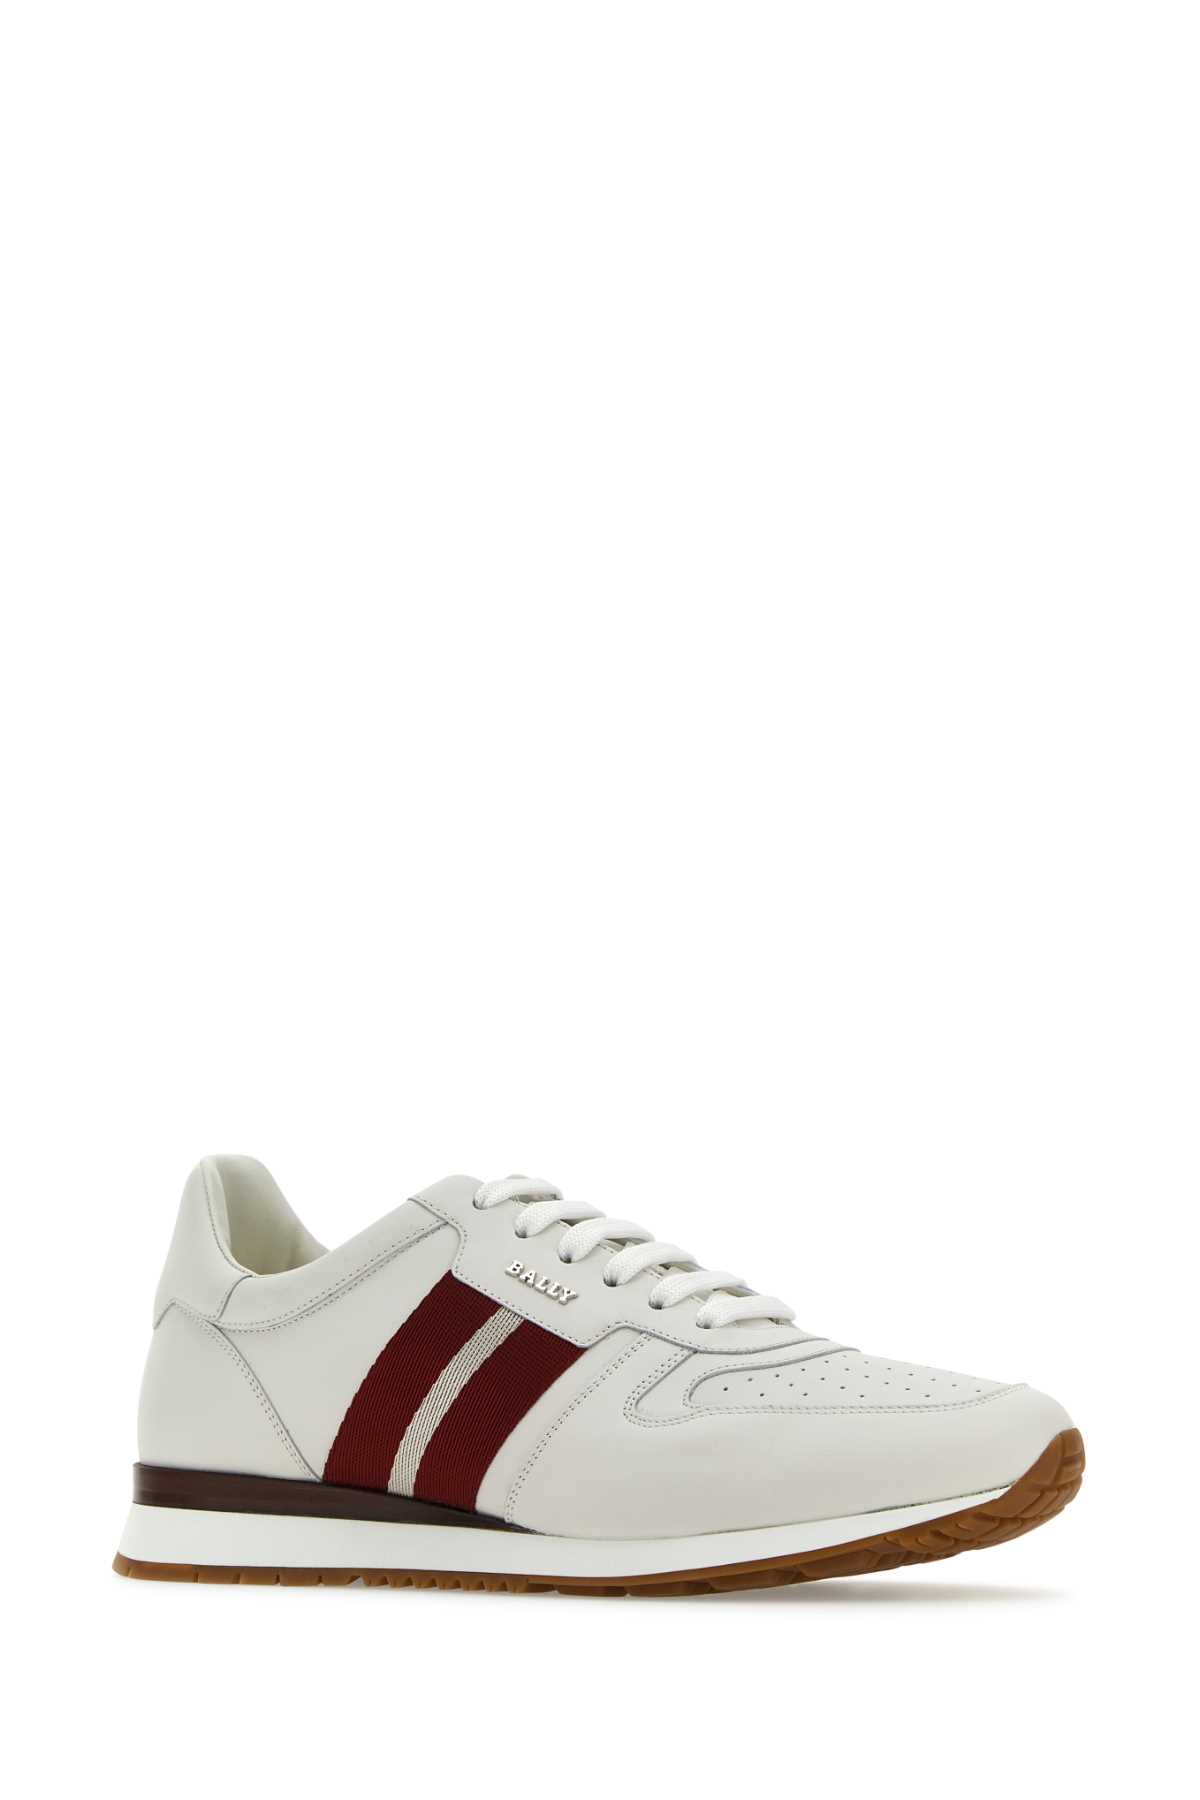 Shop Bally Chalk Leather Astel Sneakers In F517